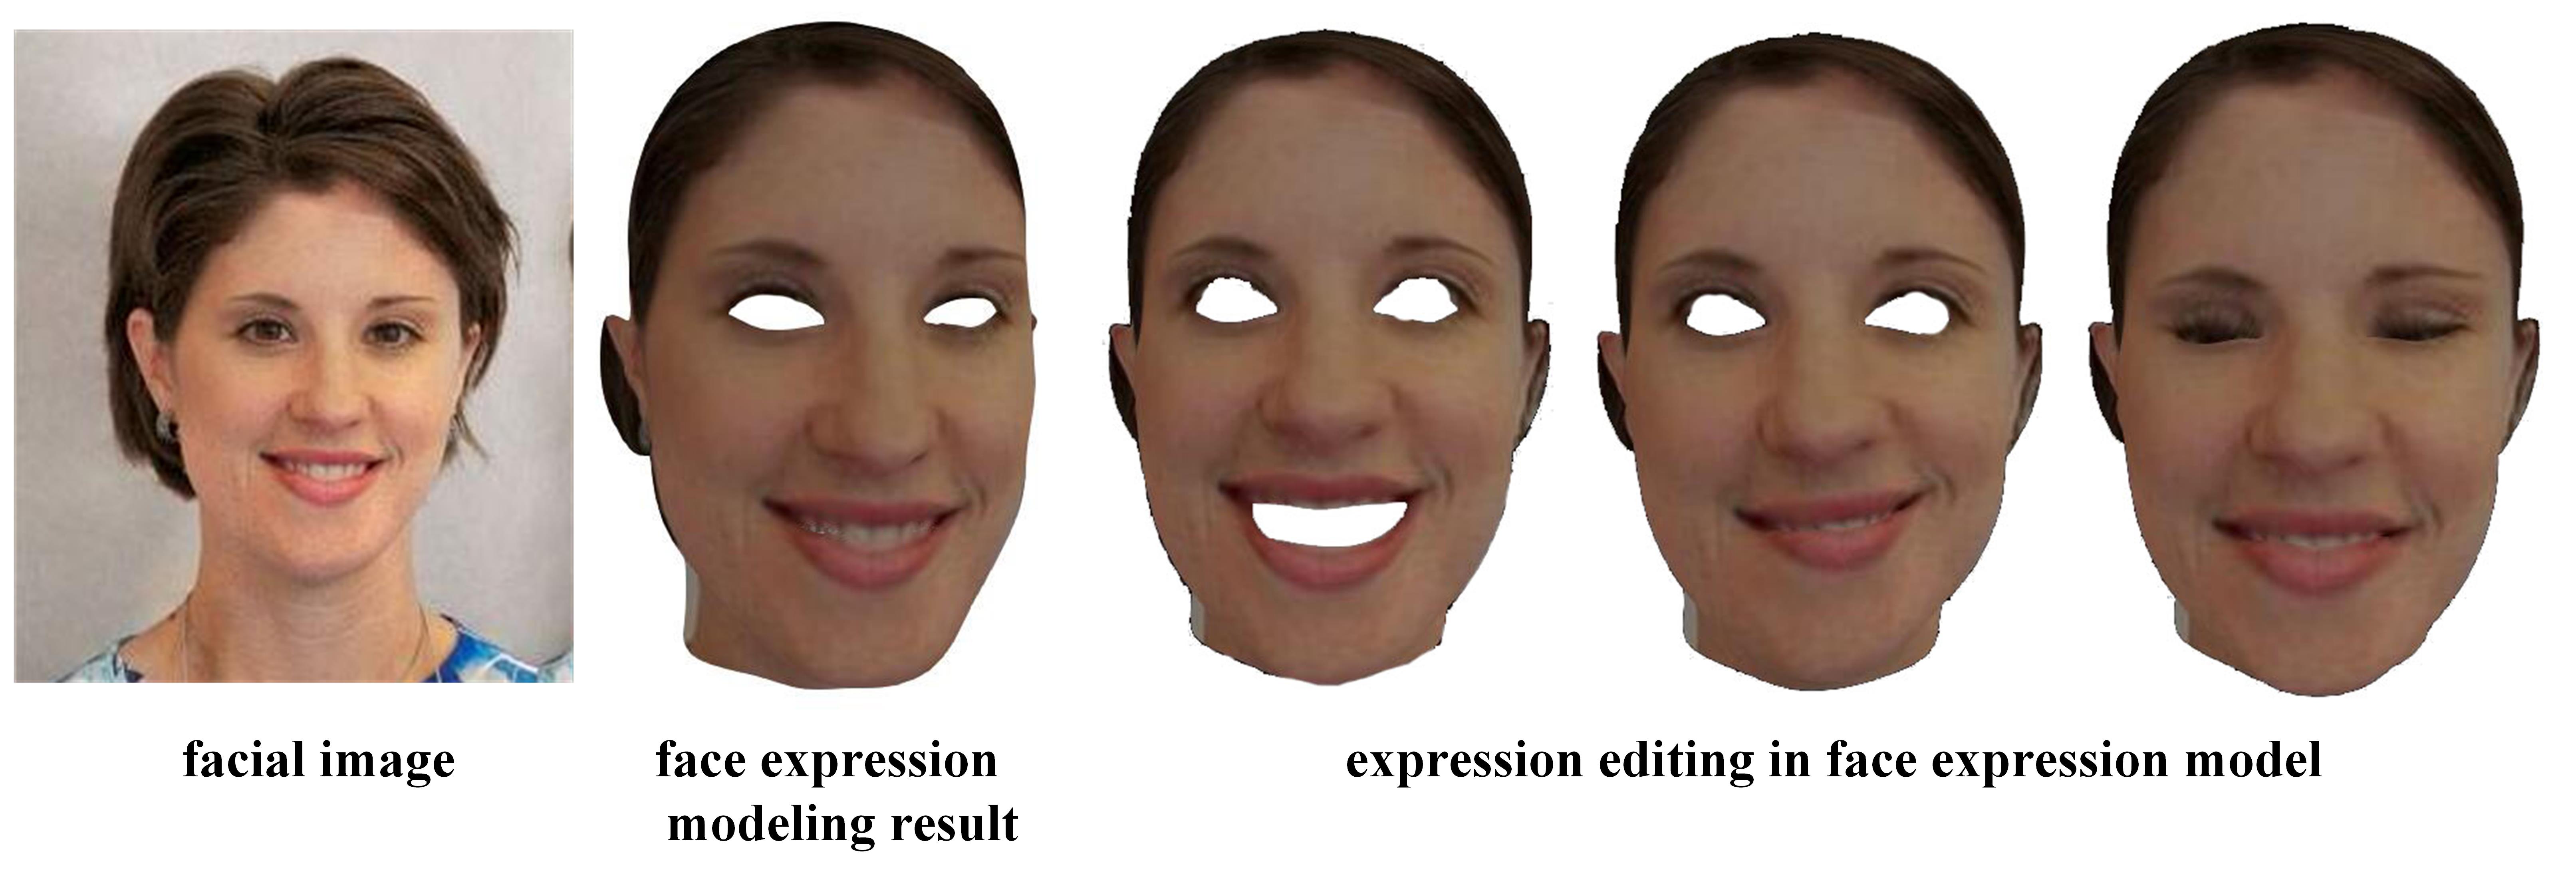 3D facial expression modeling based on facial landmarks in single image